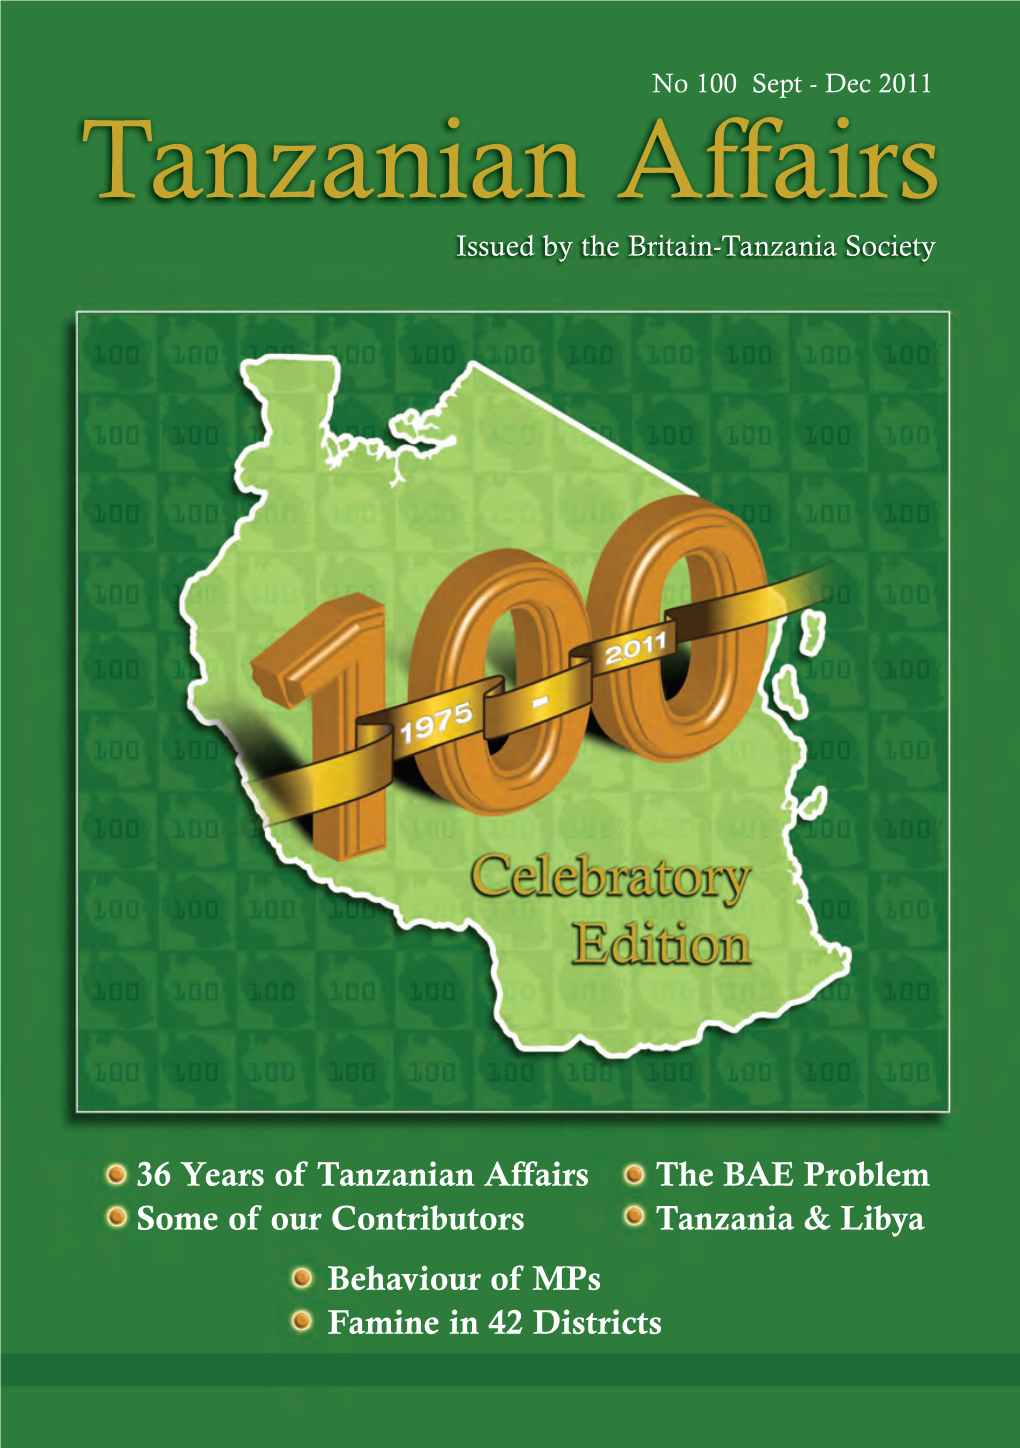 Tanzanian Affairs Issued by the Britain-Tanzania Society